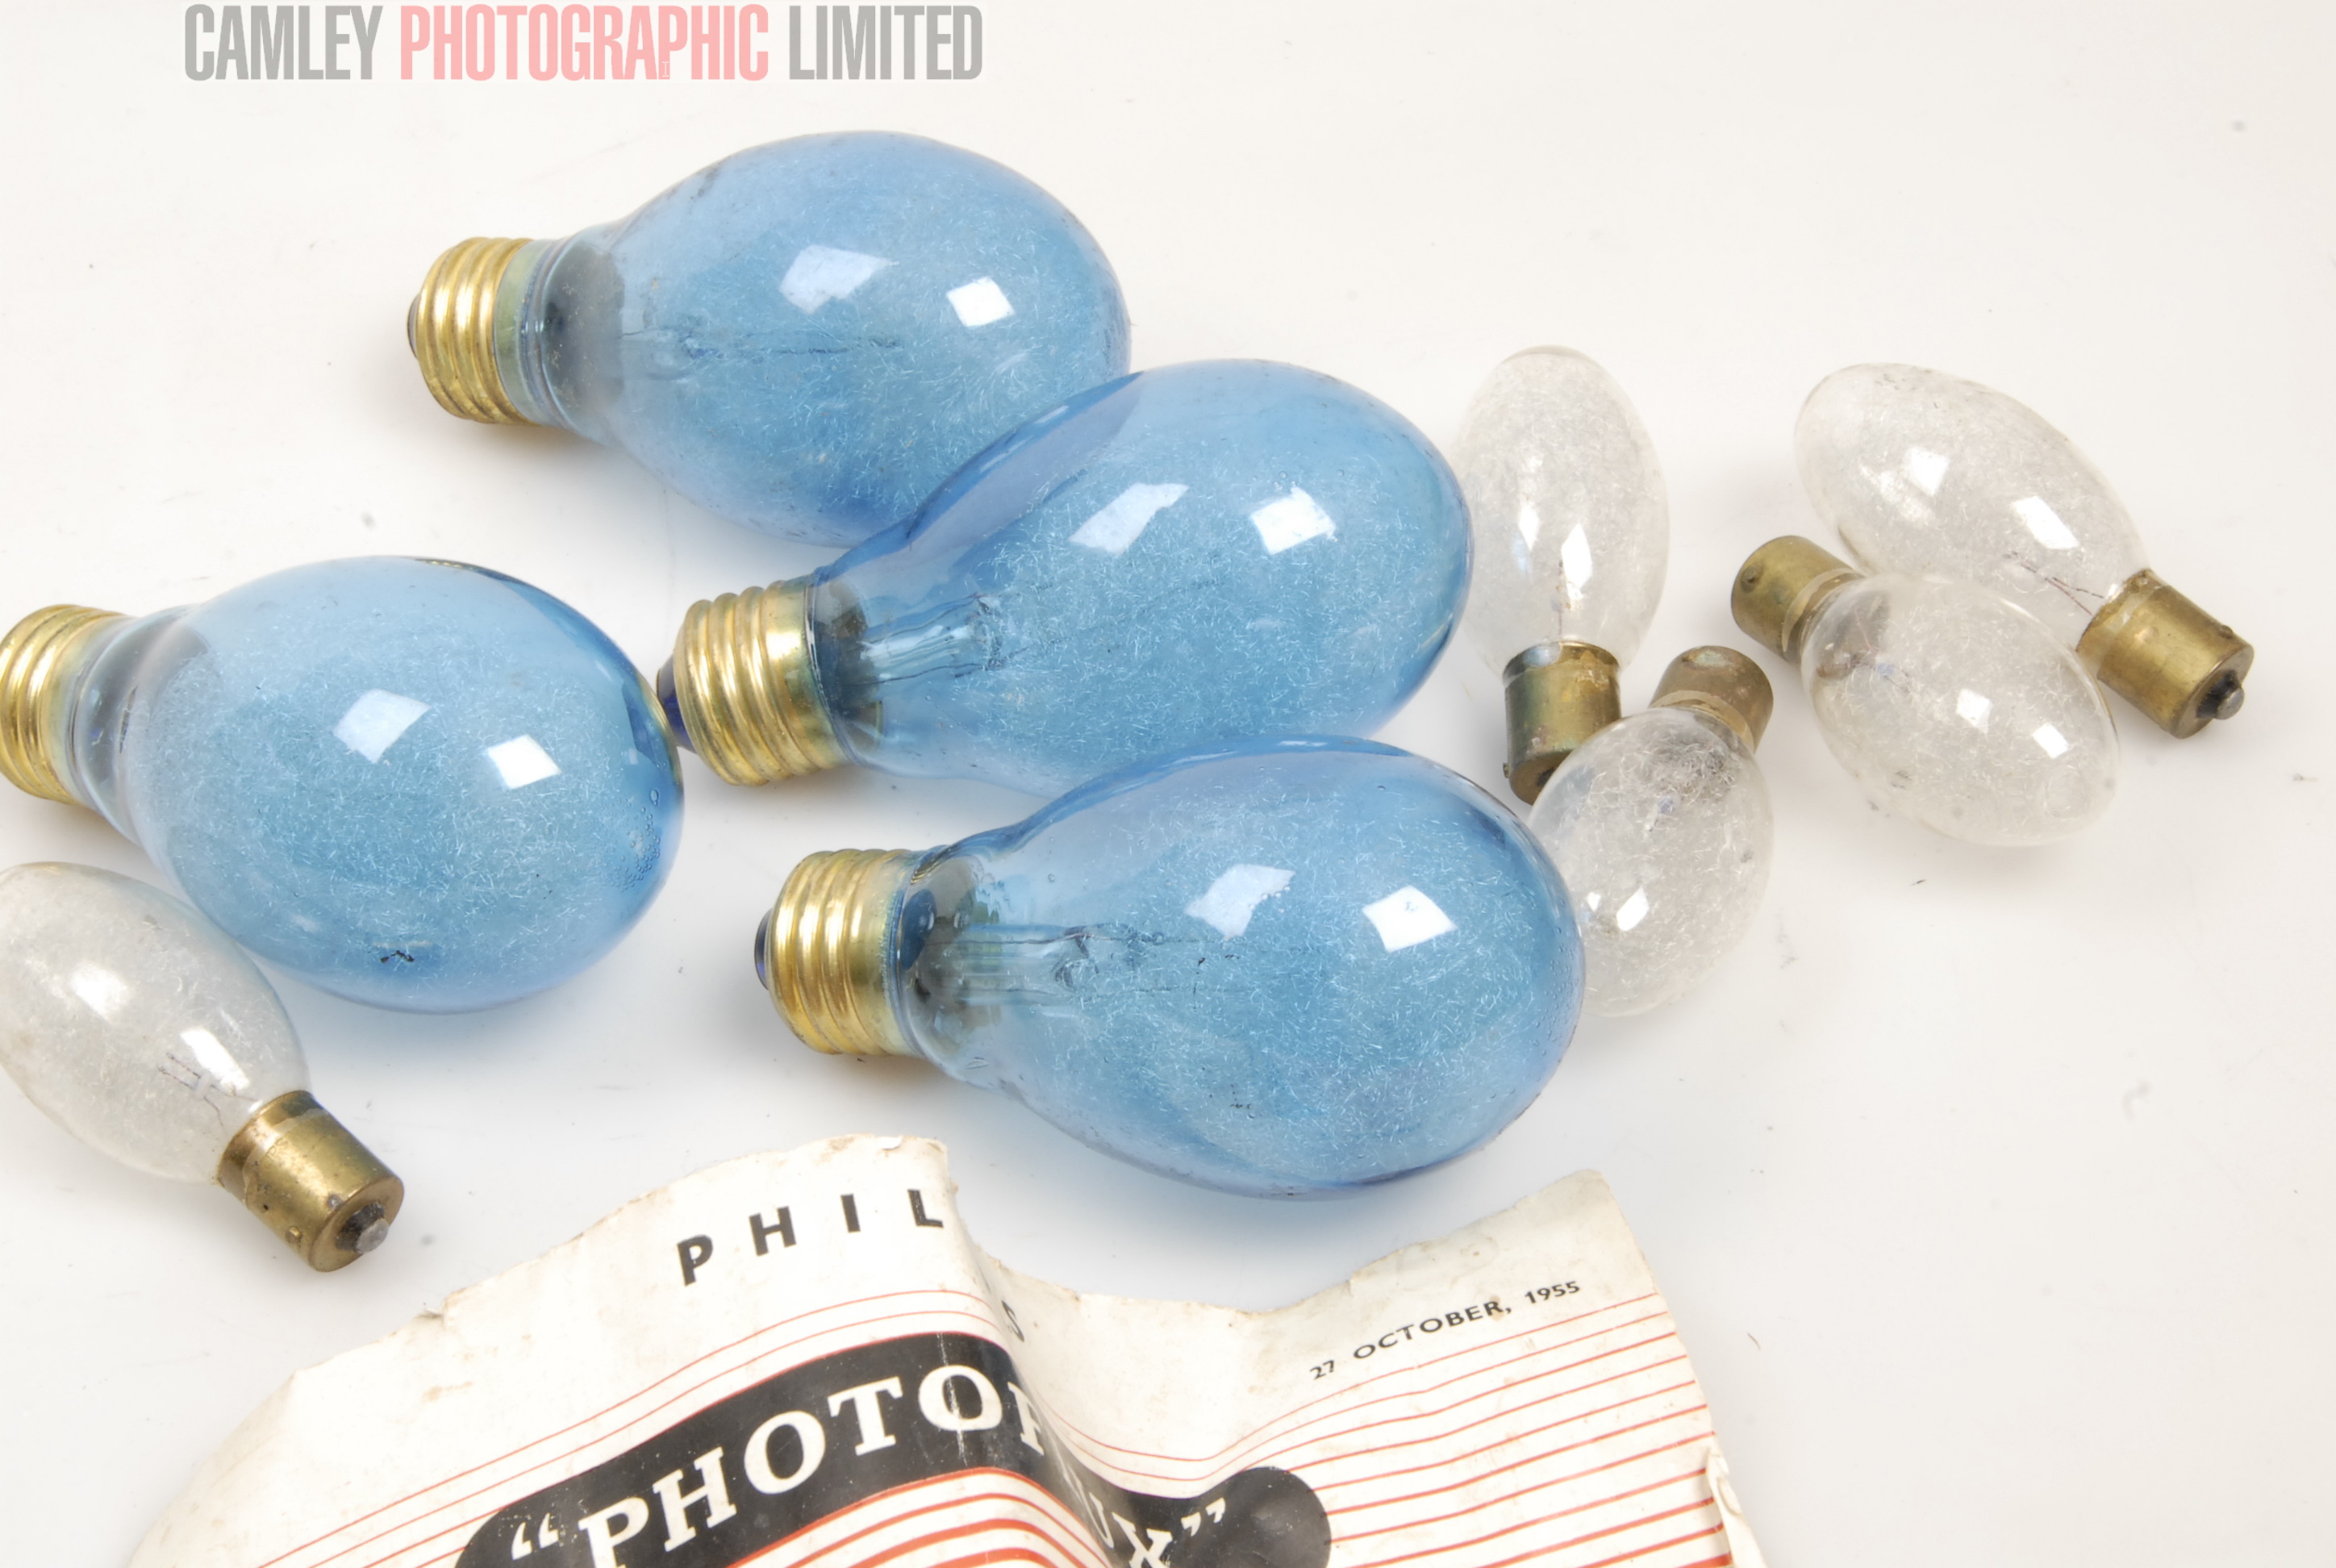 Philips Photoflux Flash Bulbs. Nine in total. Condition - 5E [7122 ...